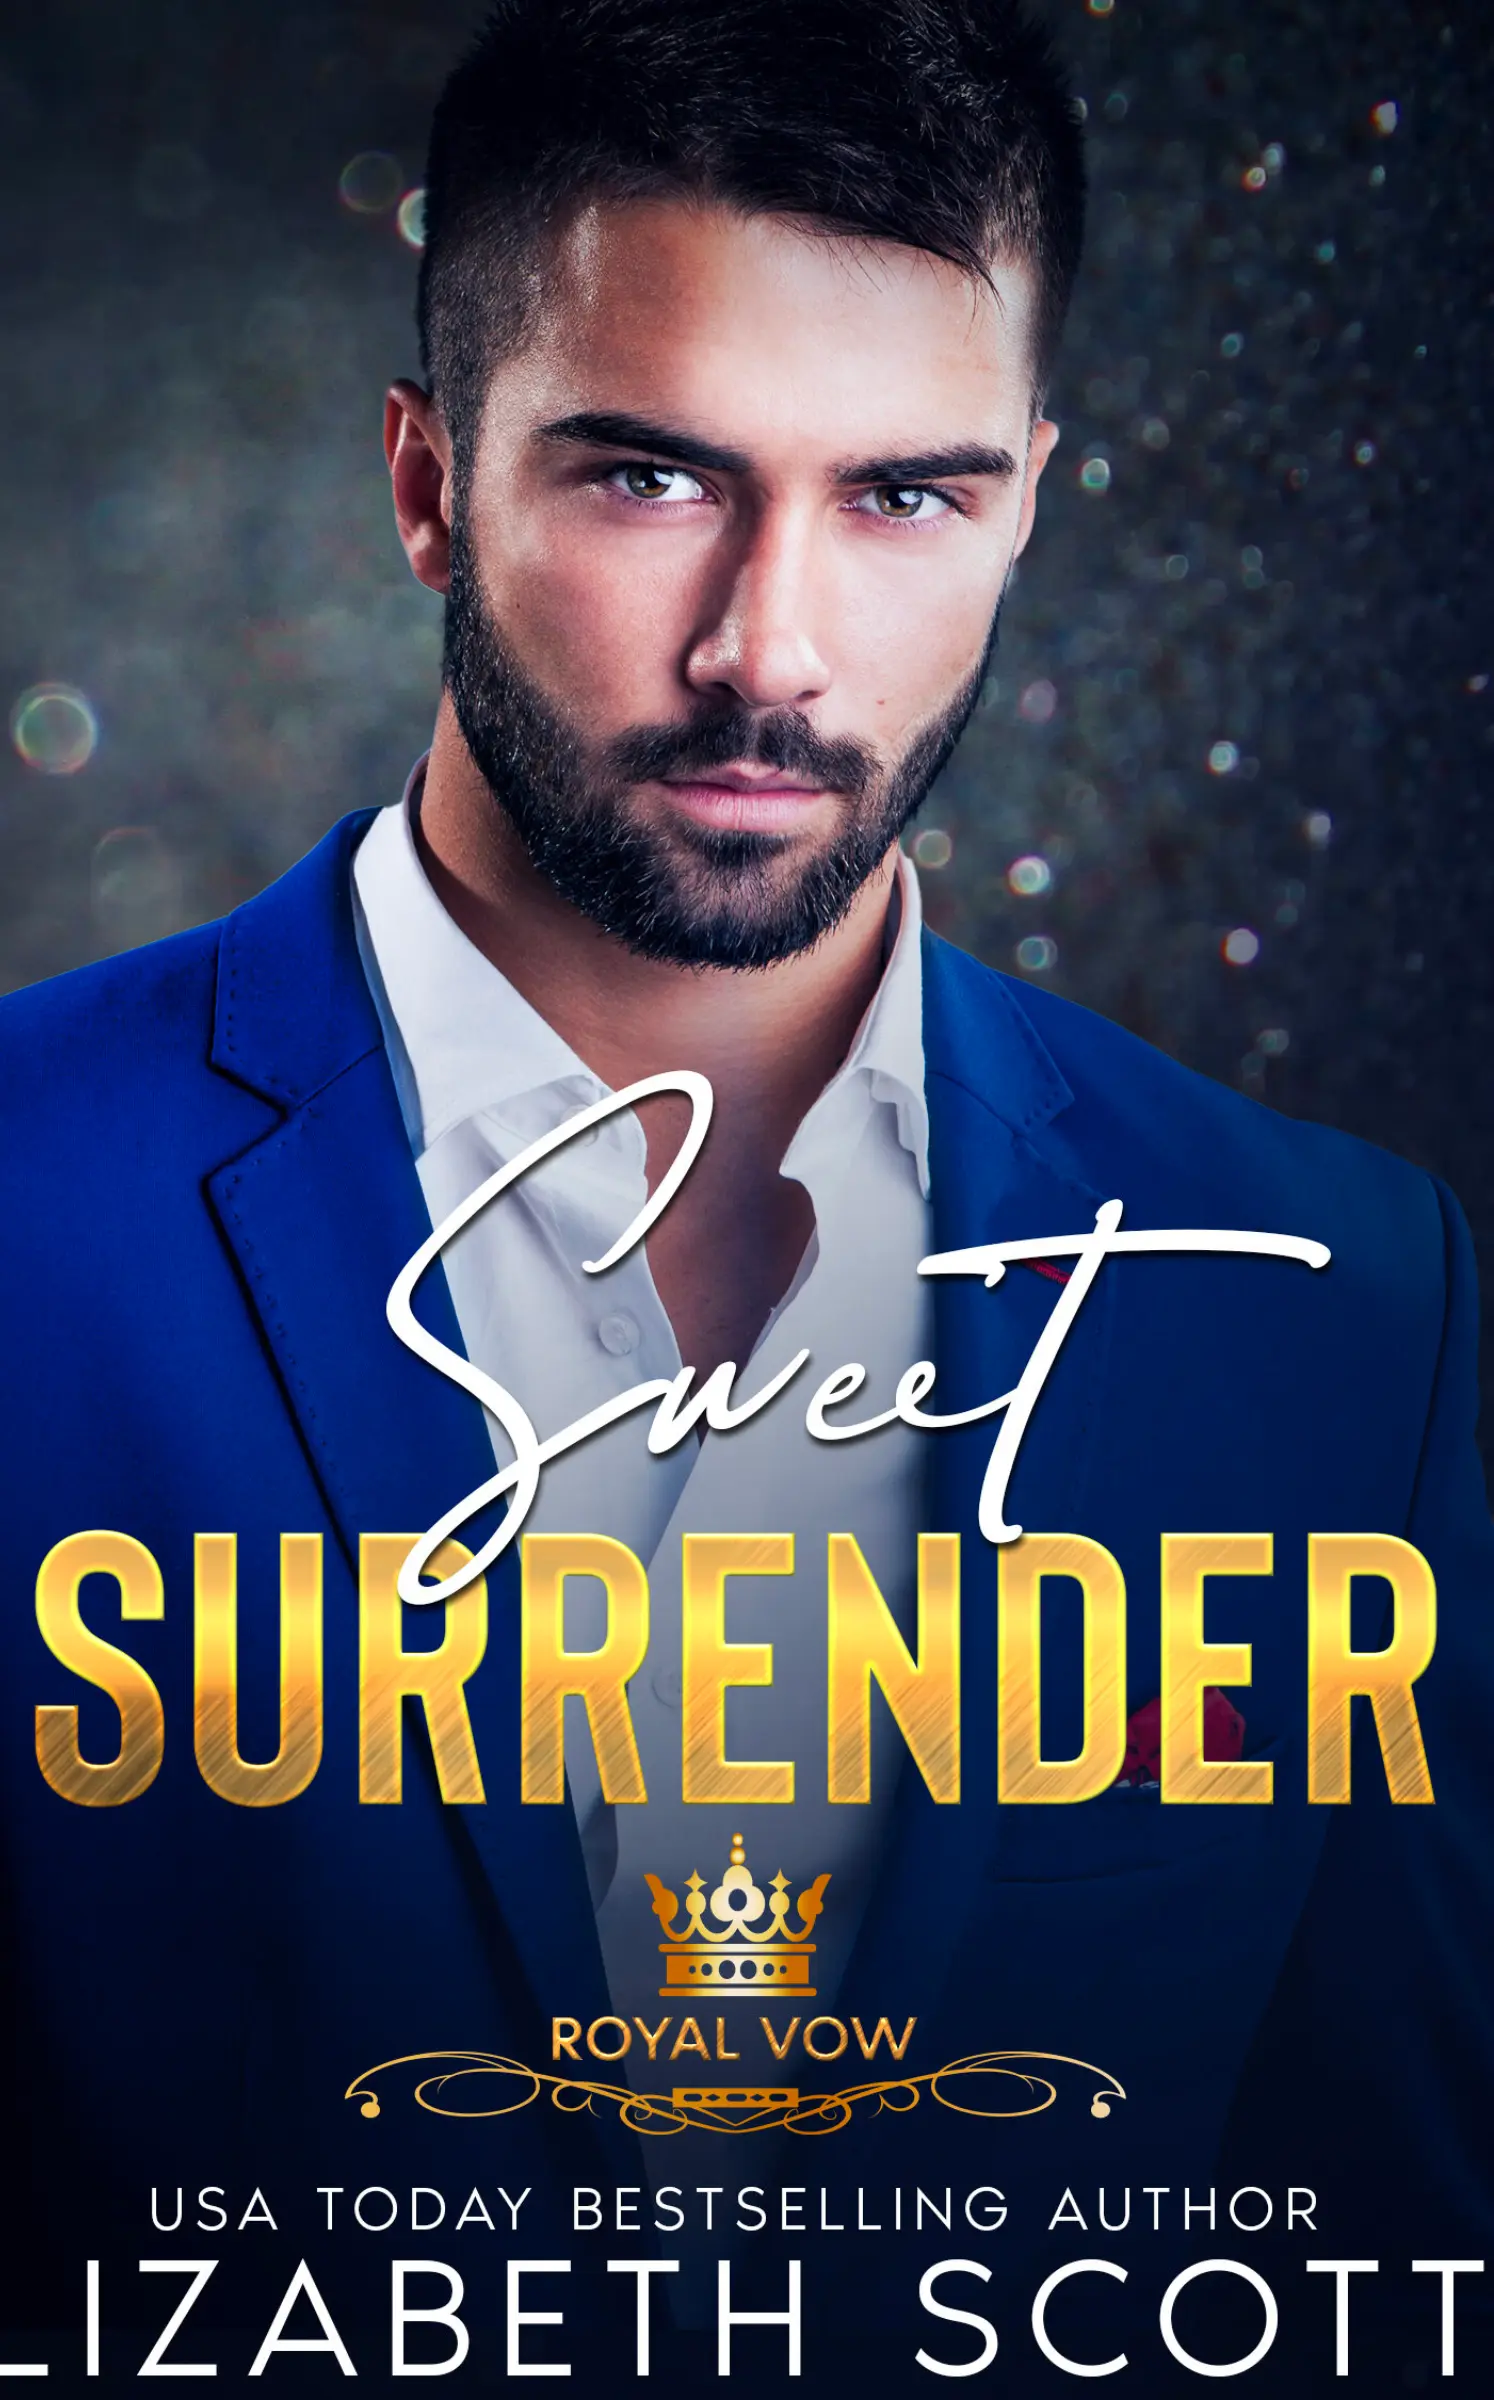 Sweet Surrender: The Royal Vow Series by USA Today Bestselling author of contemporary romance Lizabeth Scott.